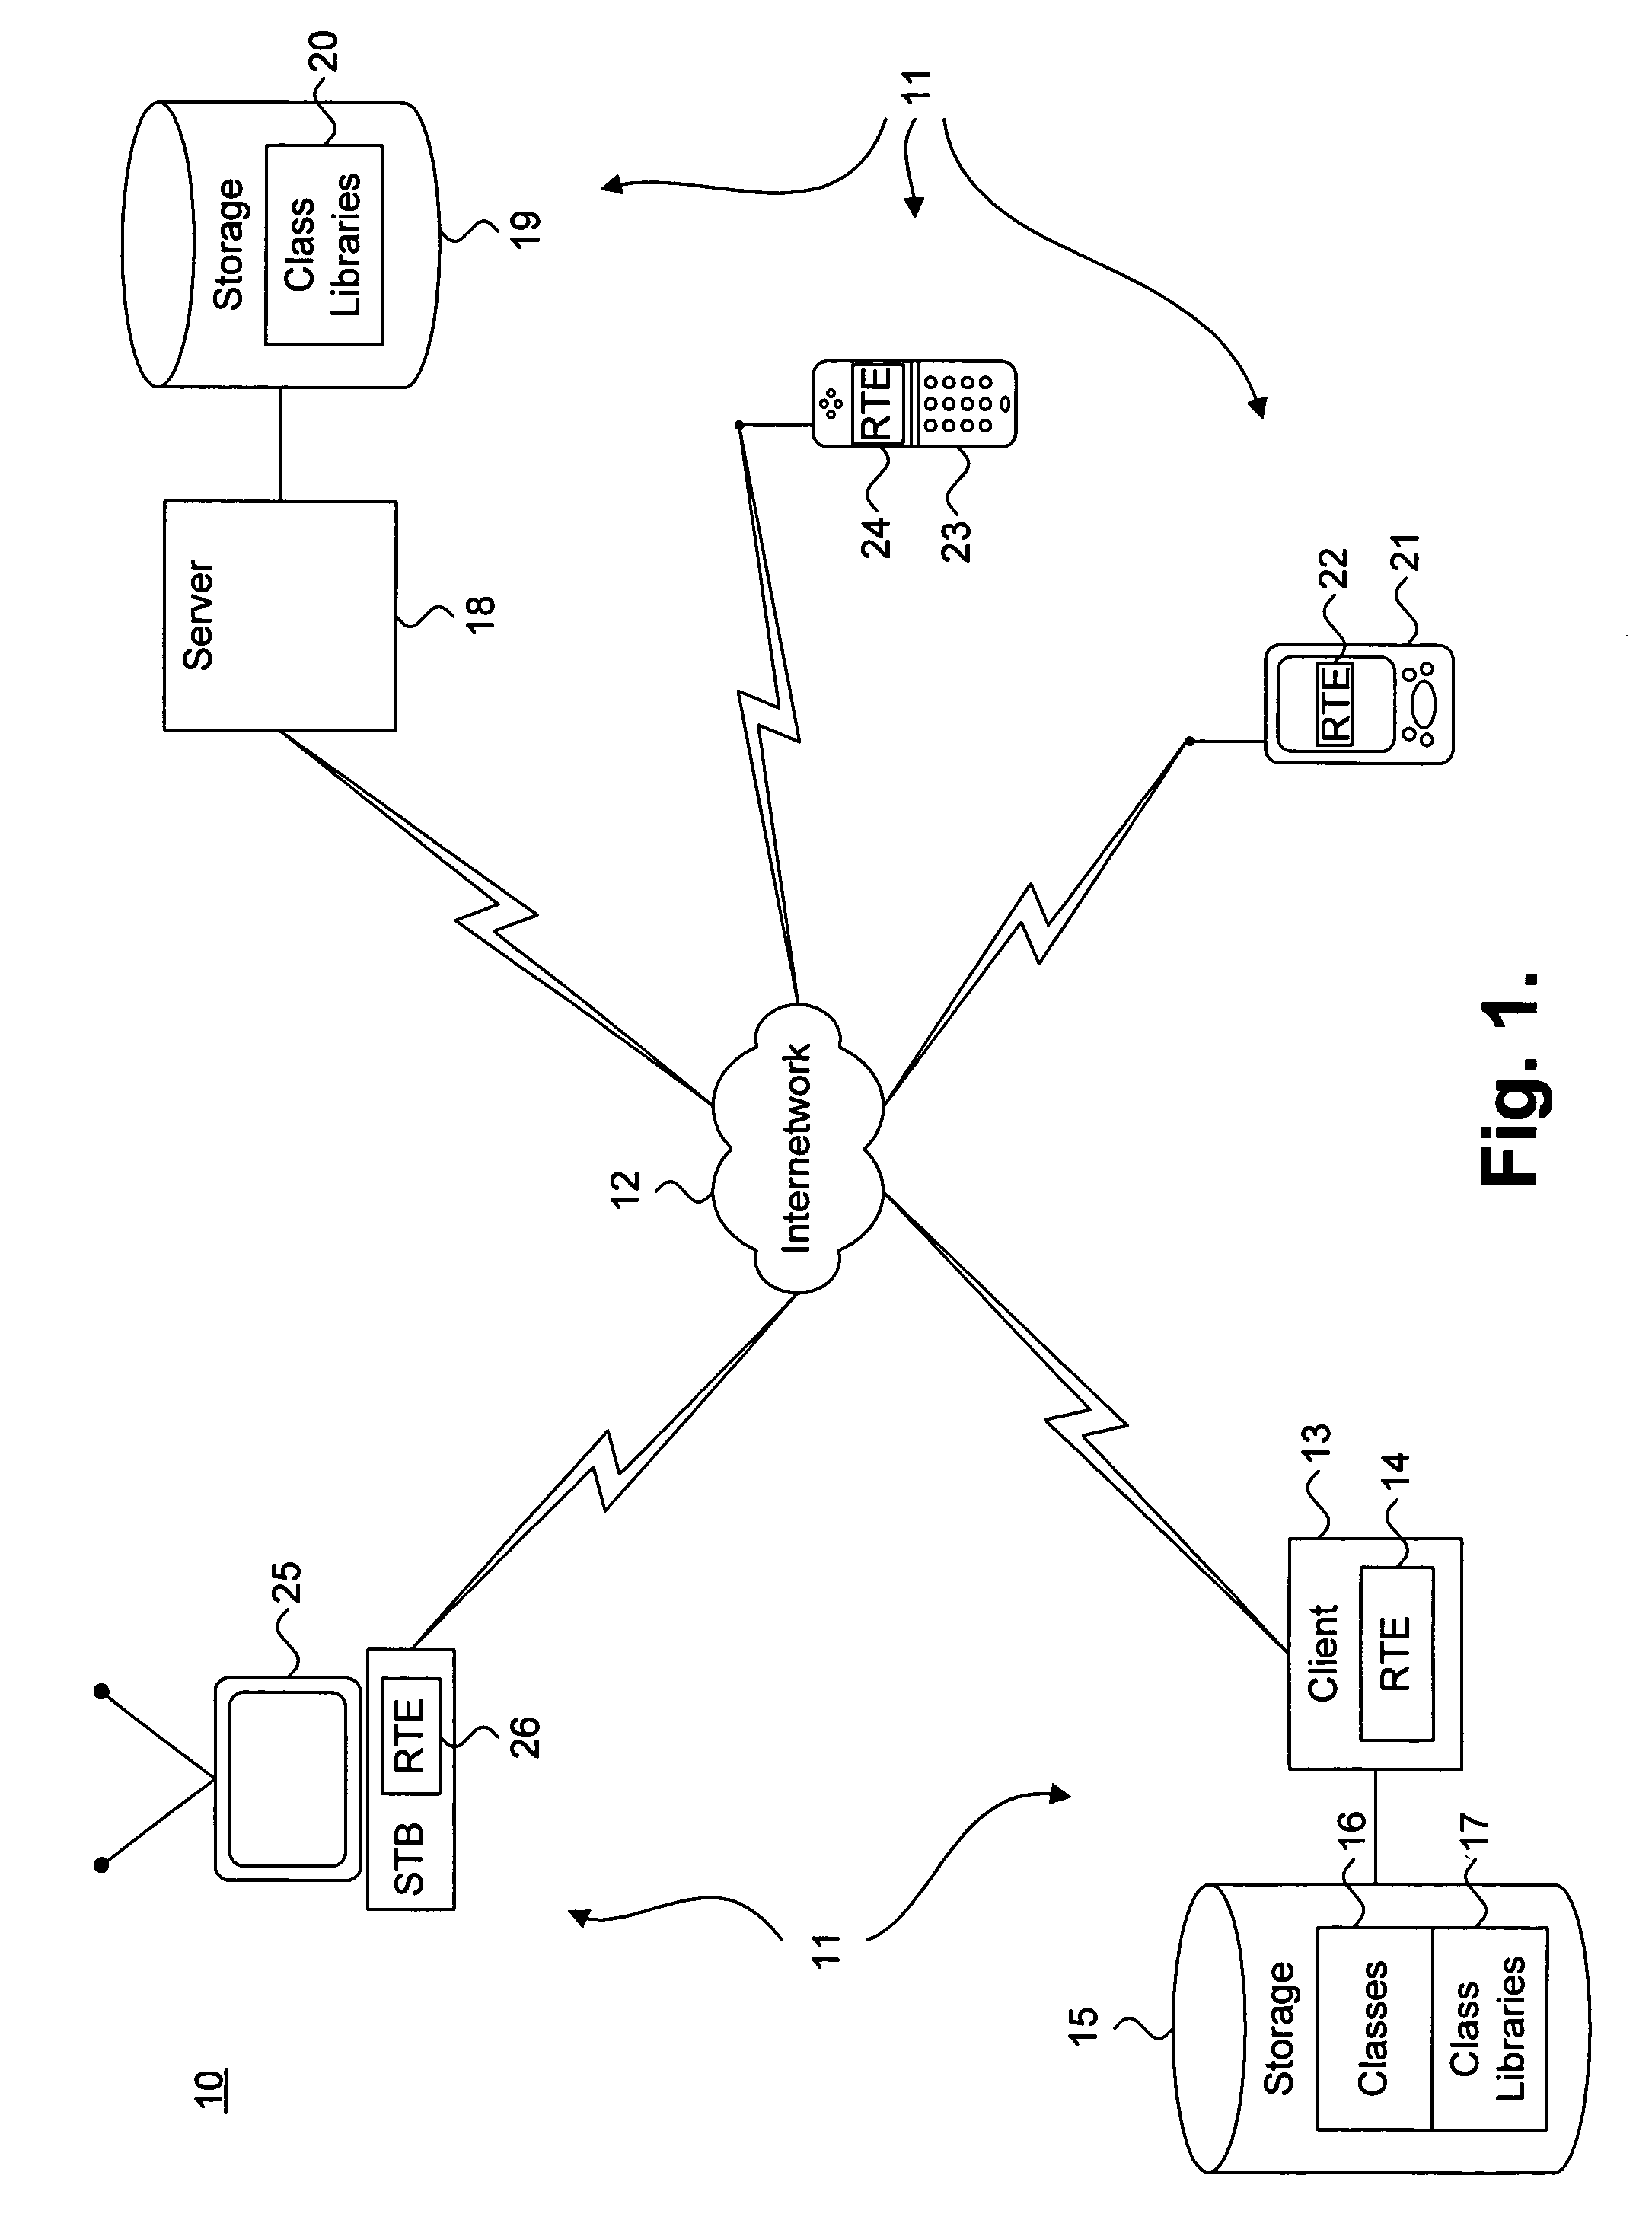 System and method for dynamically and persistently tracking incremental profiling data in a process cloning application environment